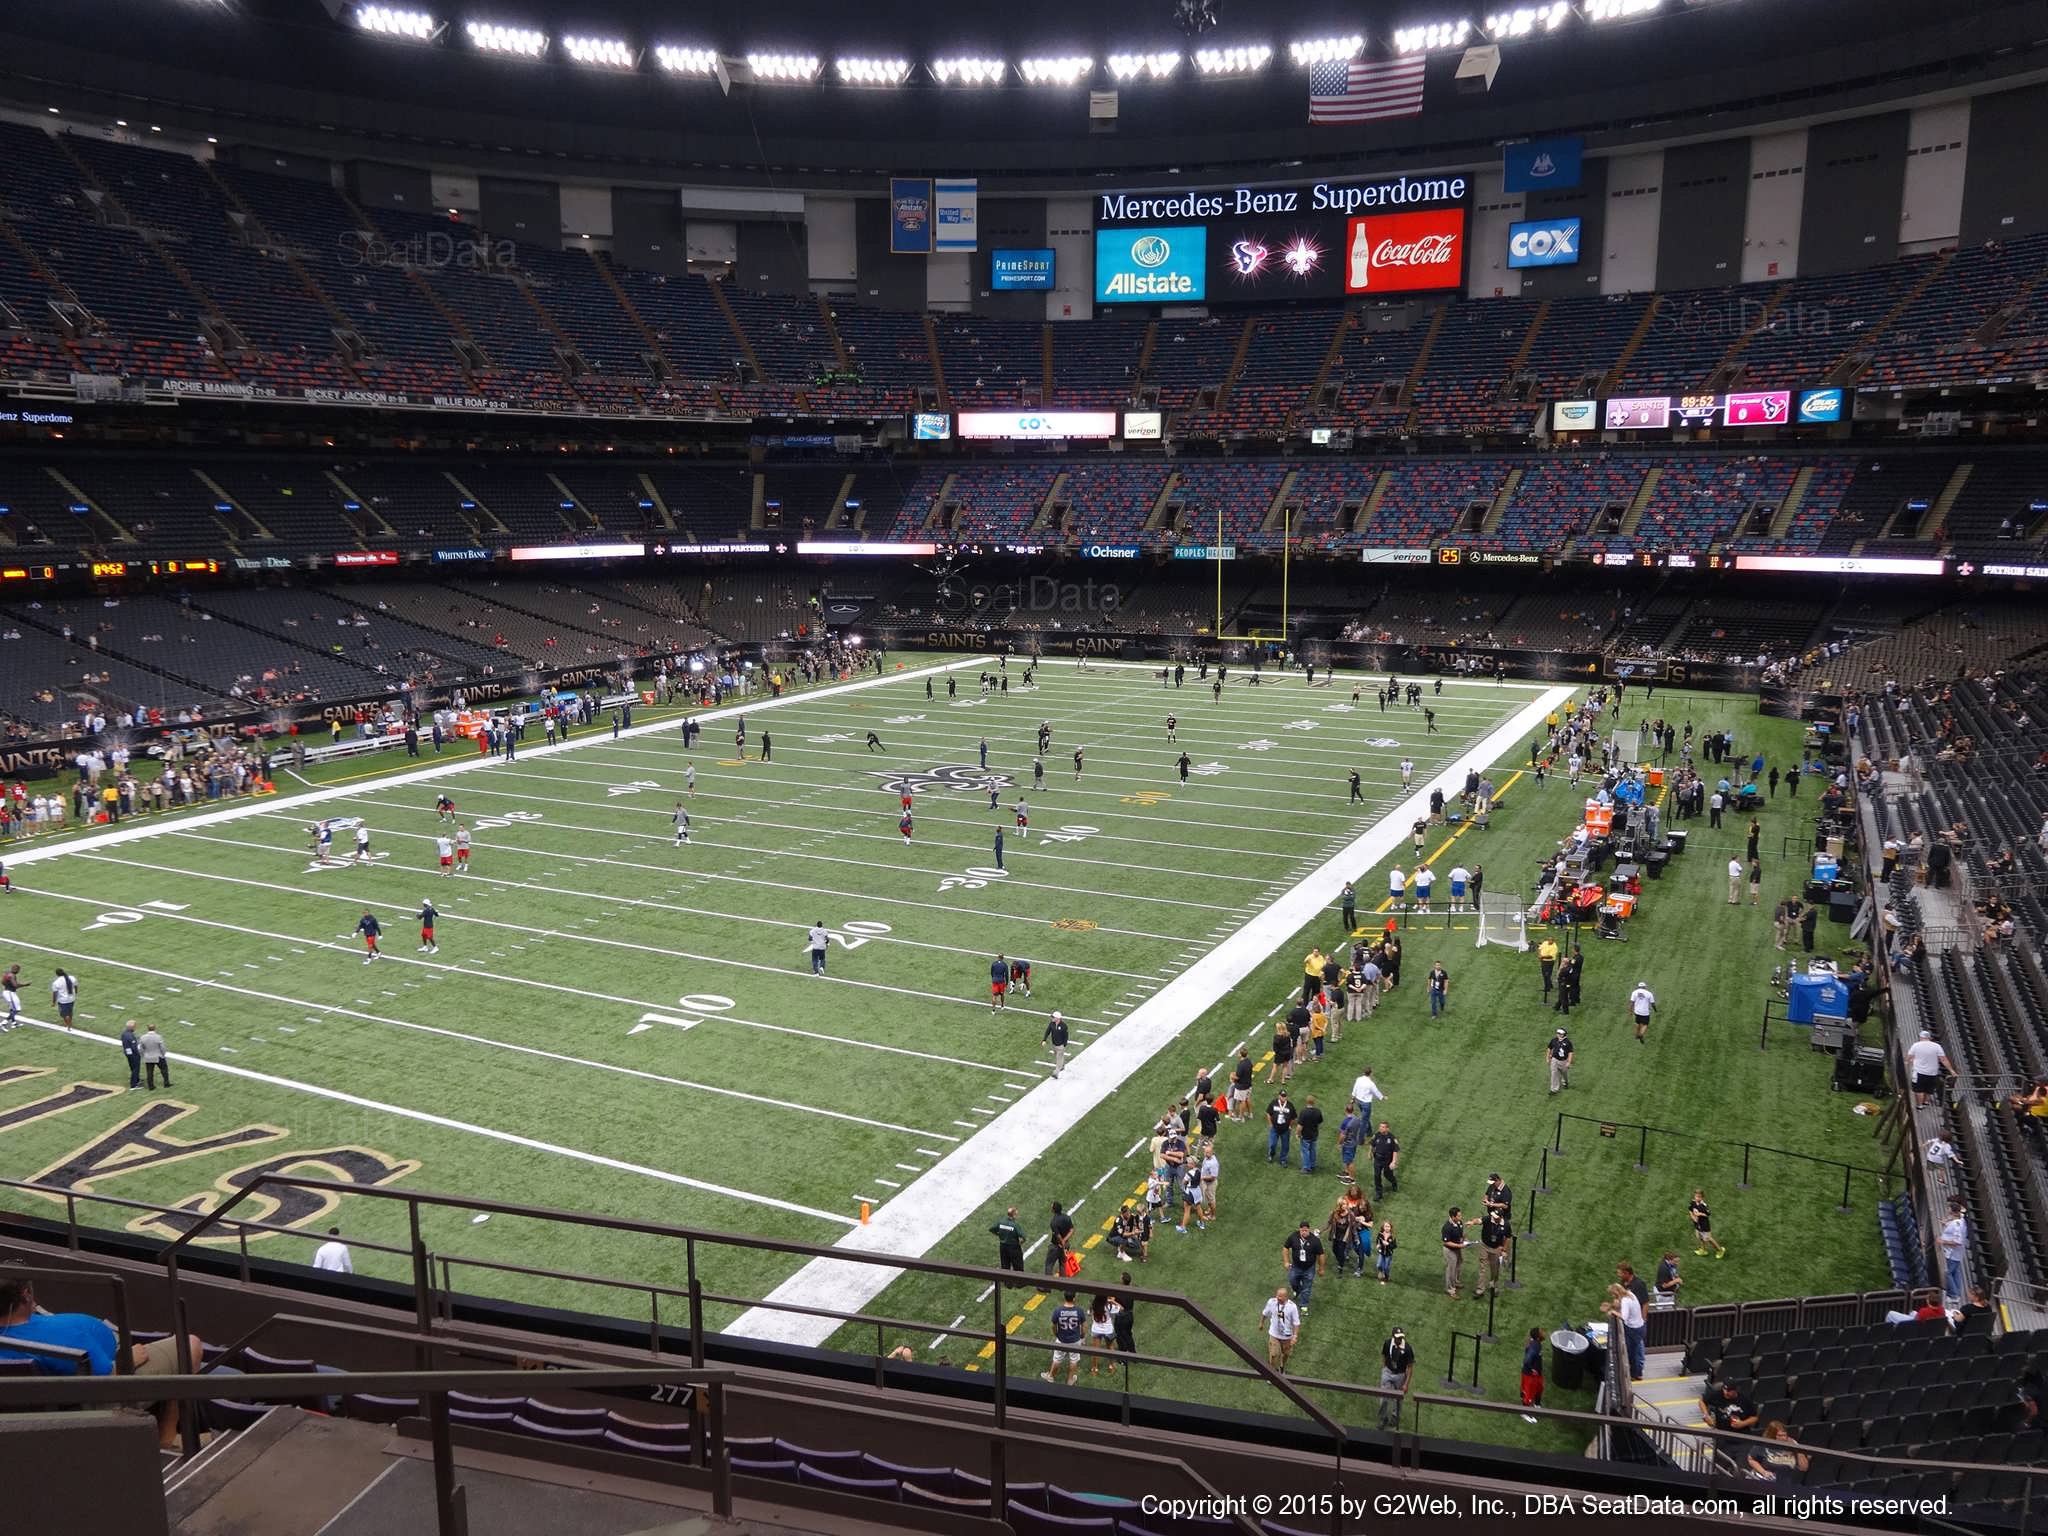 Seat view from section 344 at the Mercedes-Benz Superdome, home of the New Orleans Saints